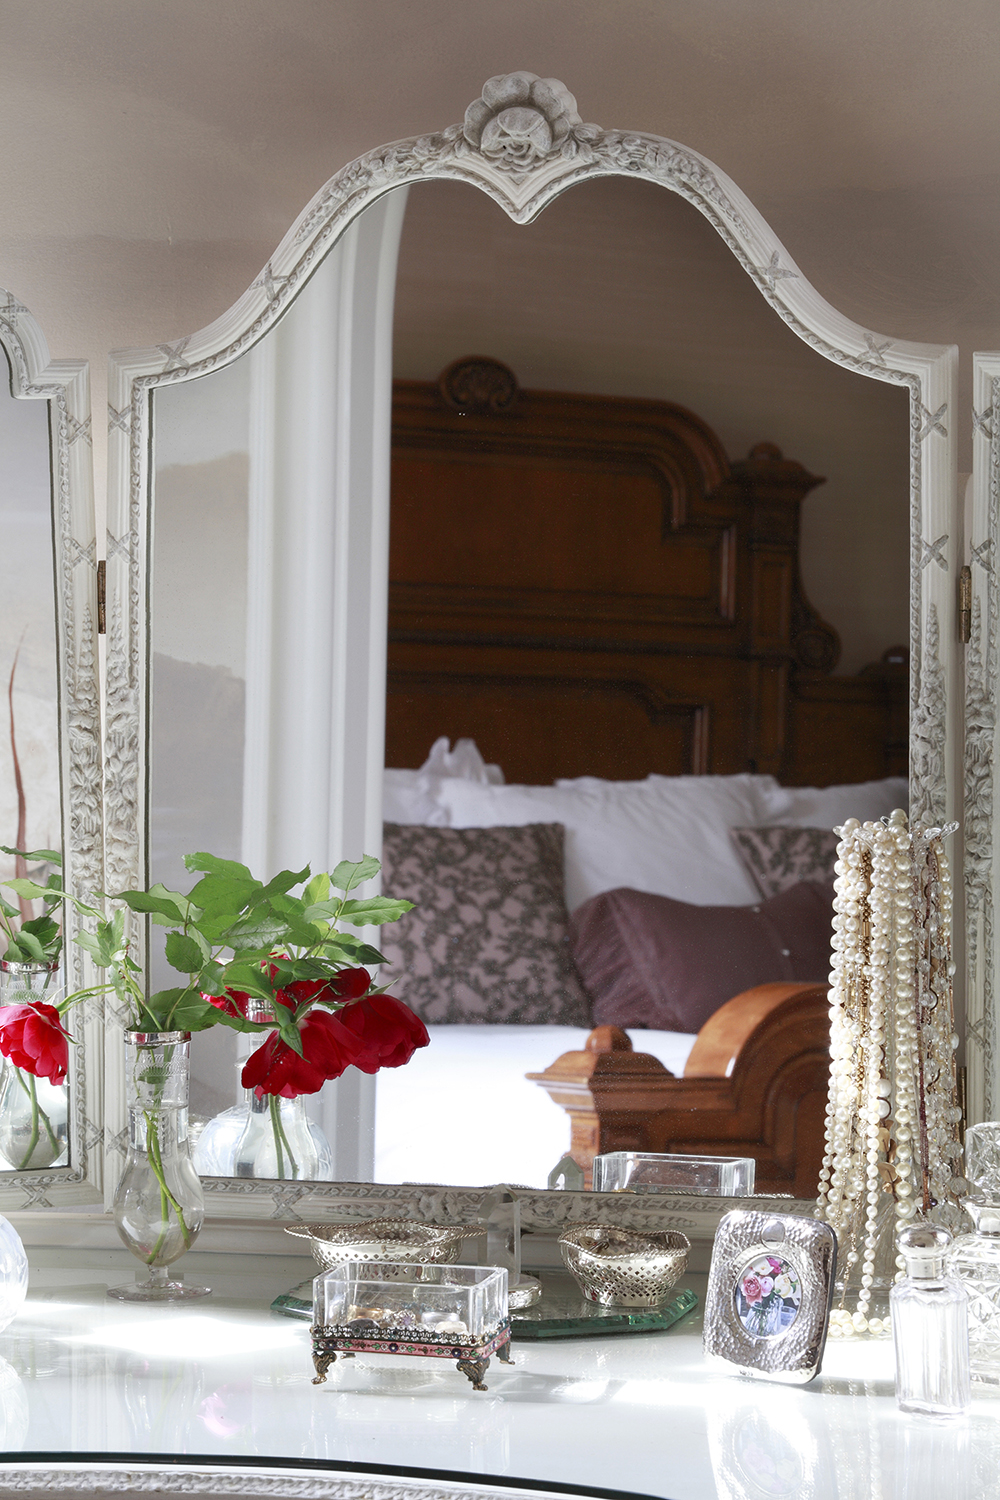 The high wooden Edwardian bedhead is reflected in the dressing table mirror.  